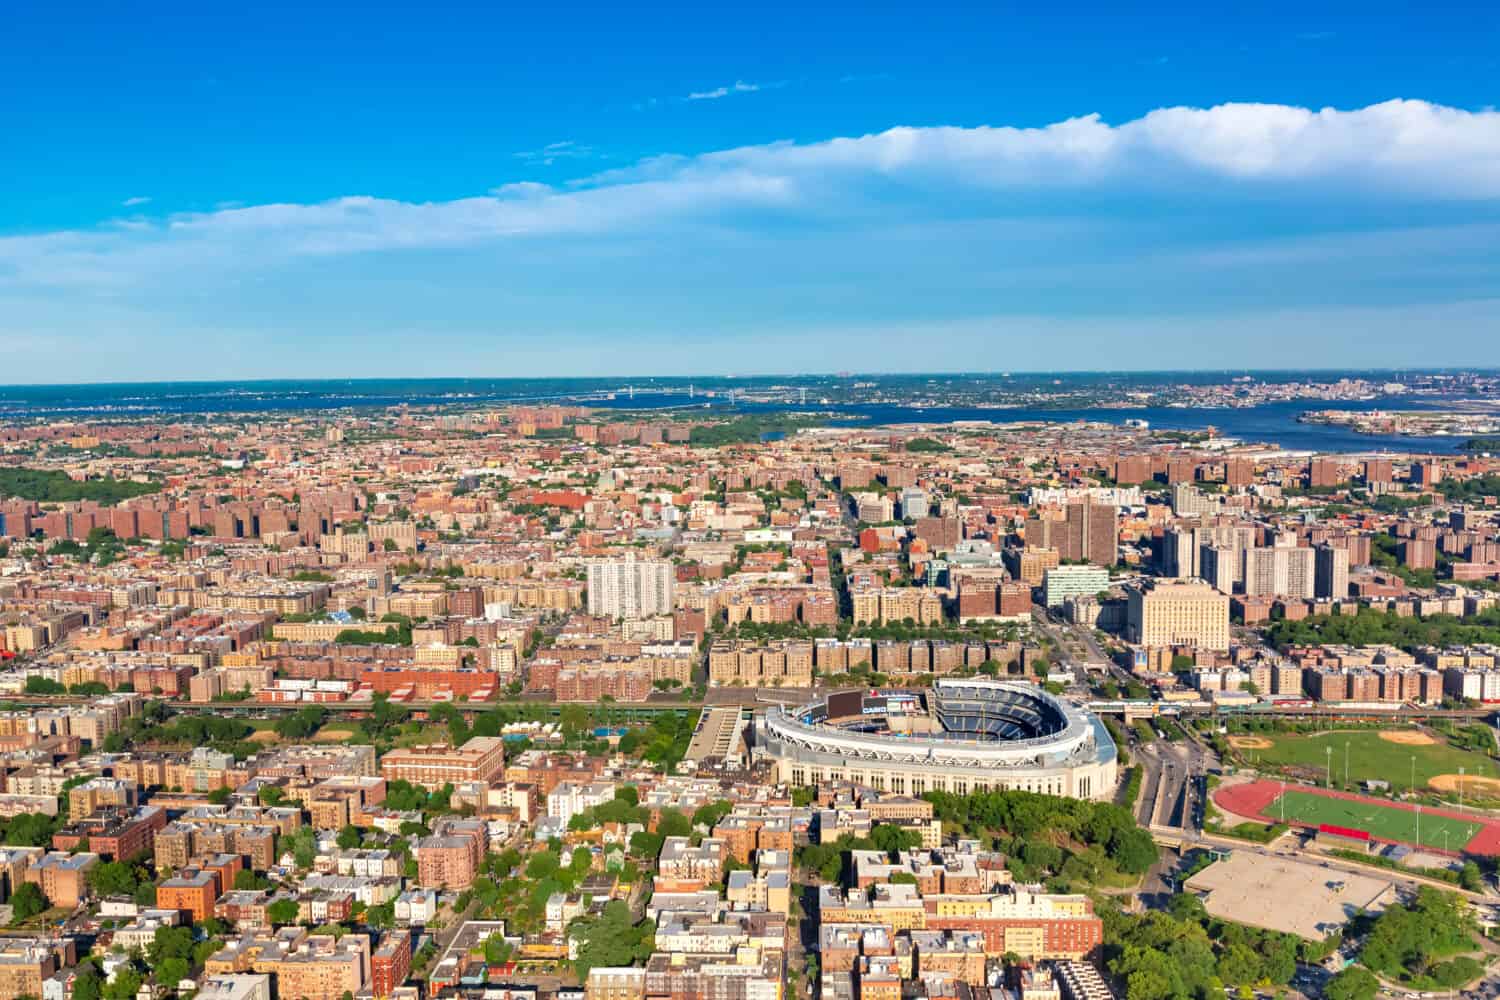 Aerial view of the Bronx, New York City by TierneyMJ